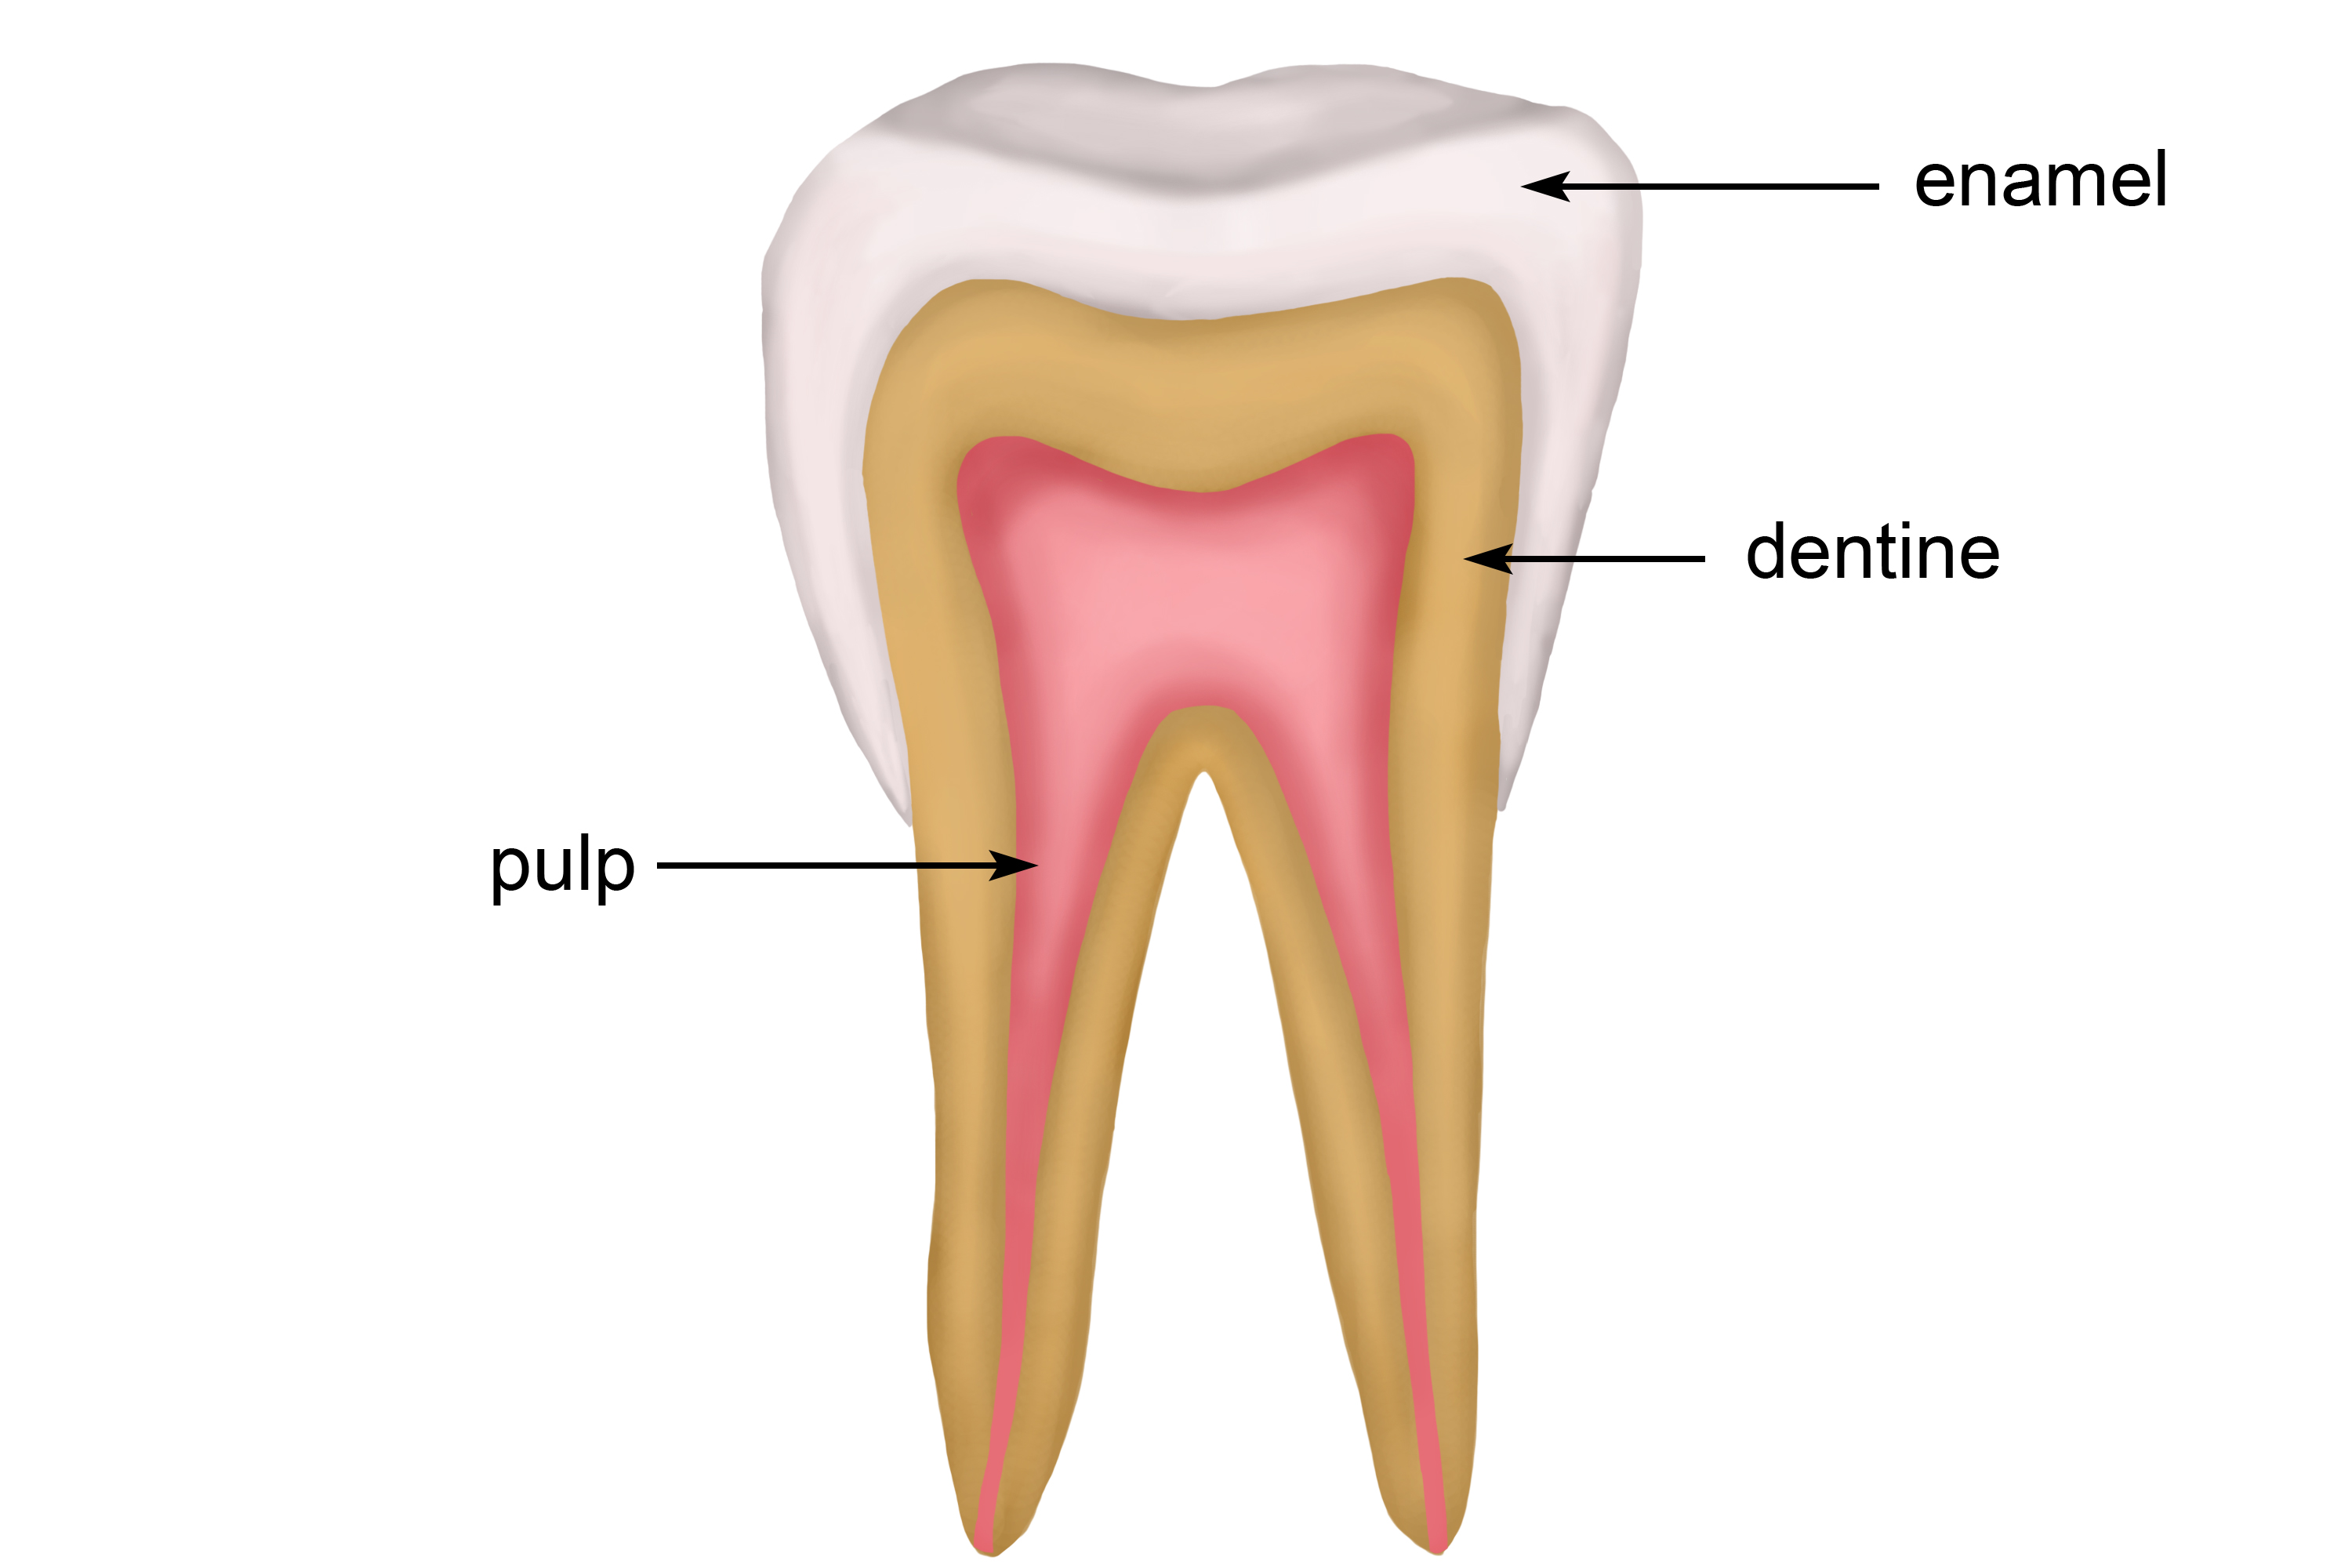 Structure of the tooth including enamel, dentine and pulp